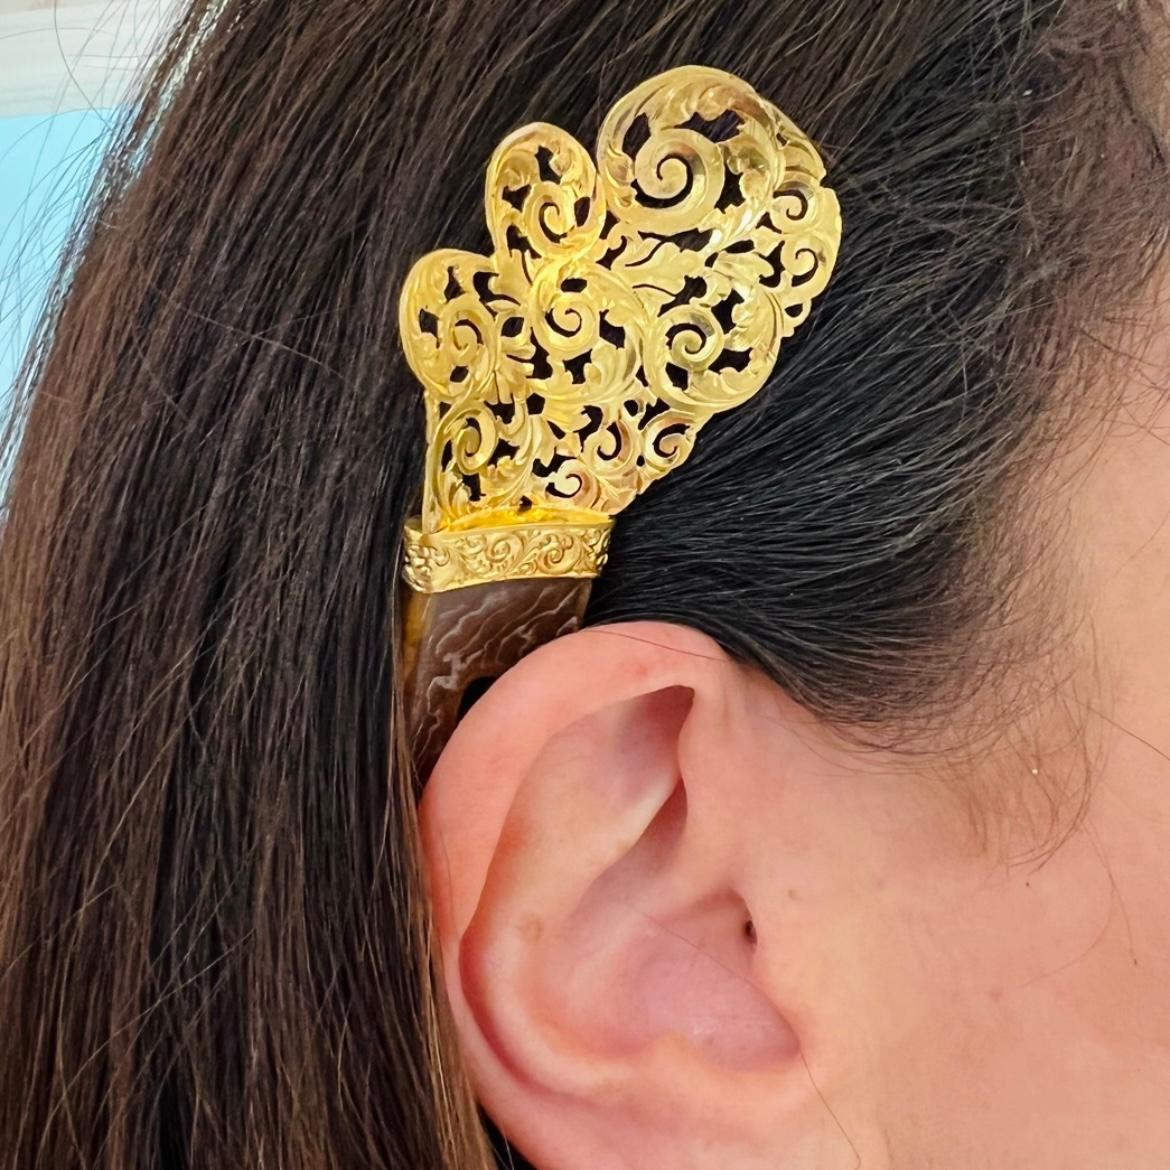 Everything old is new again! Hair accessories are the new way to make any look more fashionable. This antique hair pin is handcrafted with a spray of 18k gold scrollwork. The vintage piece measures 5 x 1 3/4in. Its unique beauty will turn heads!